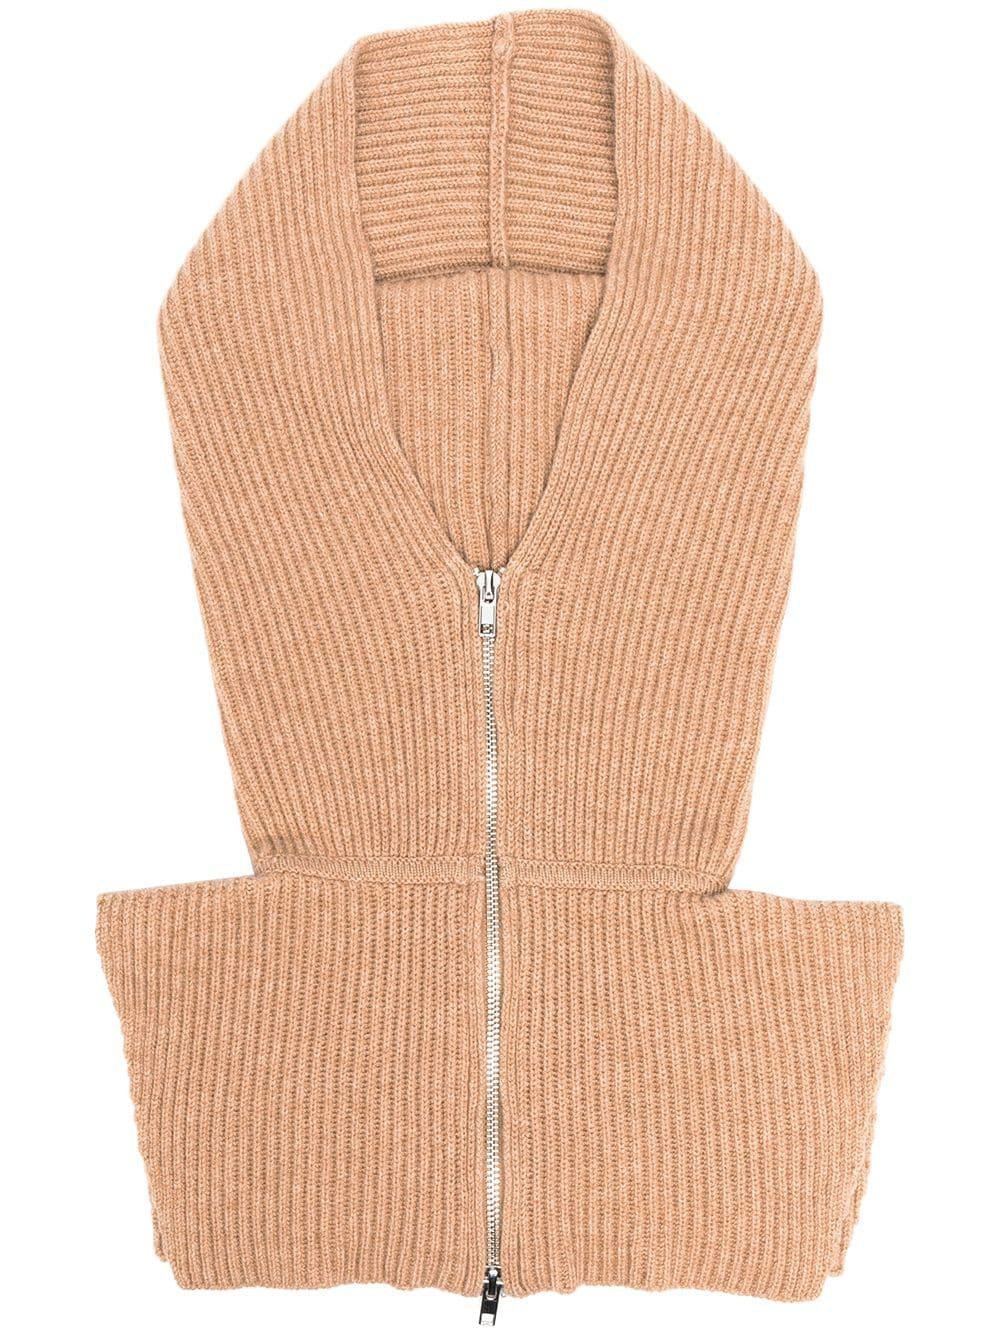 ribbed-knit hood by CASHMERE IN LOVE